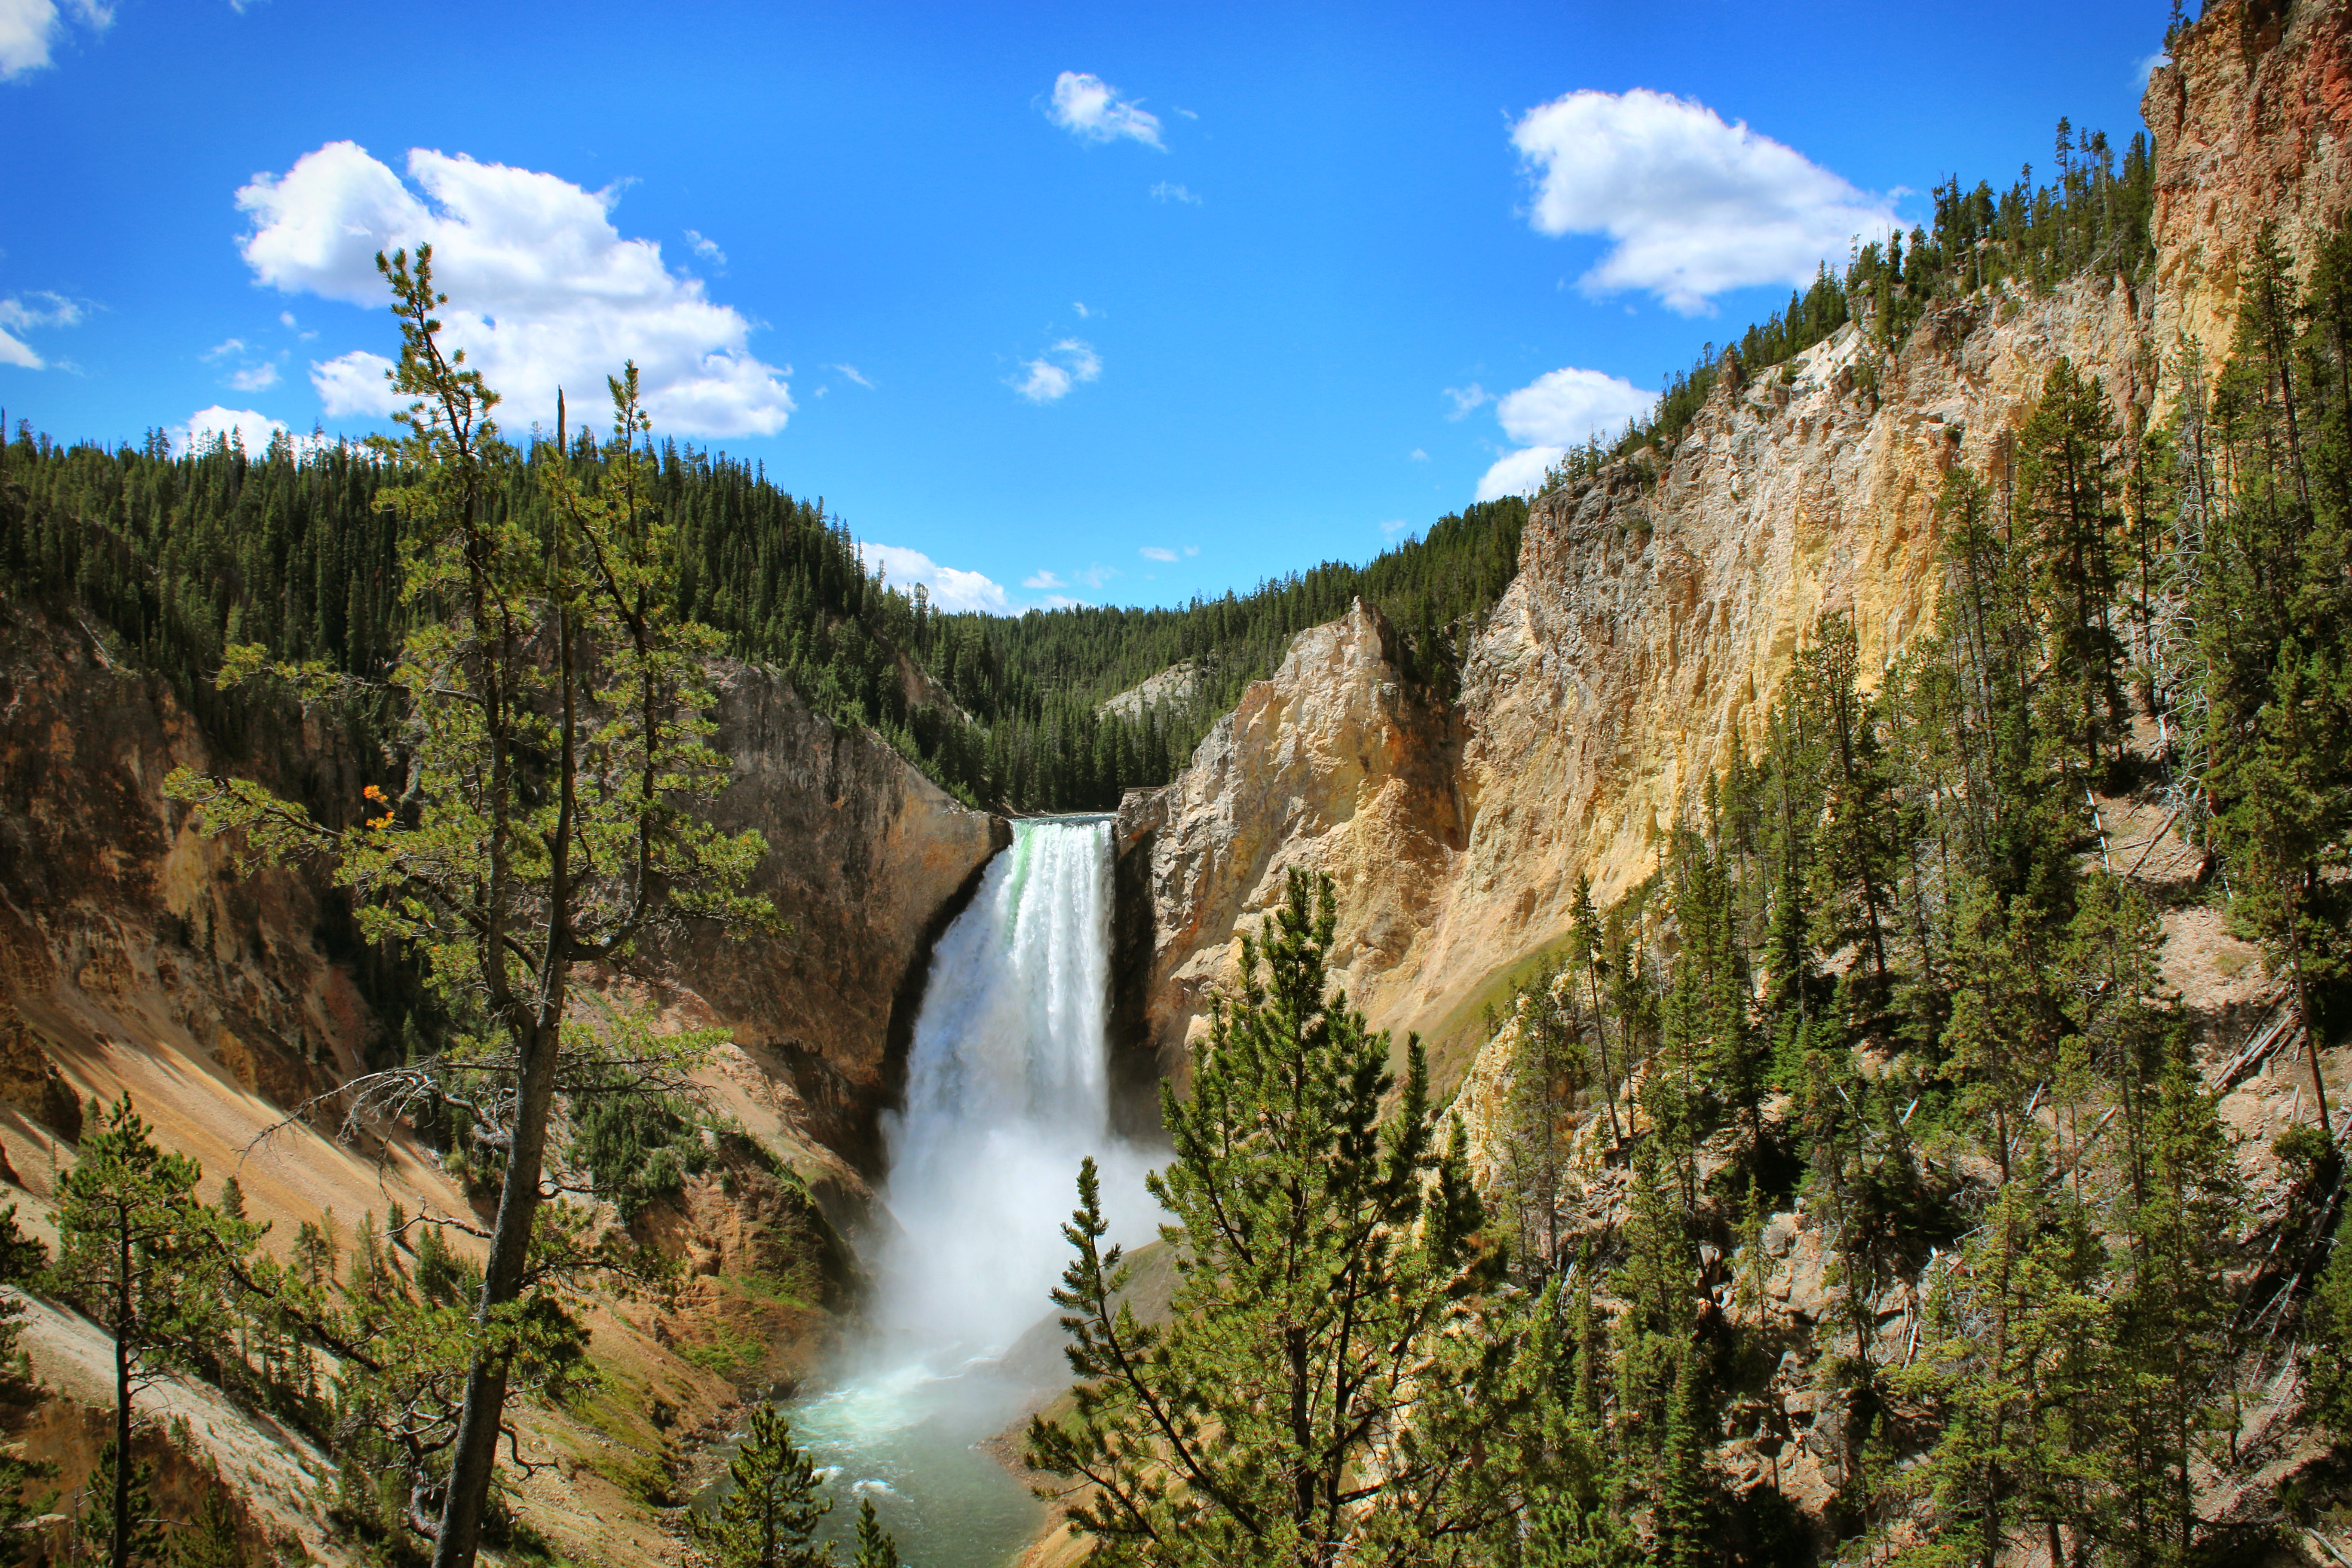 The Lower Falls of the Grand Canyon of Yellowstone.